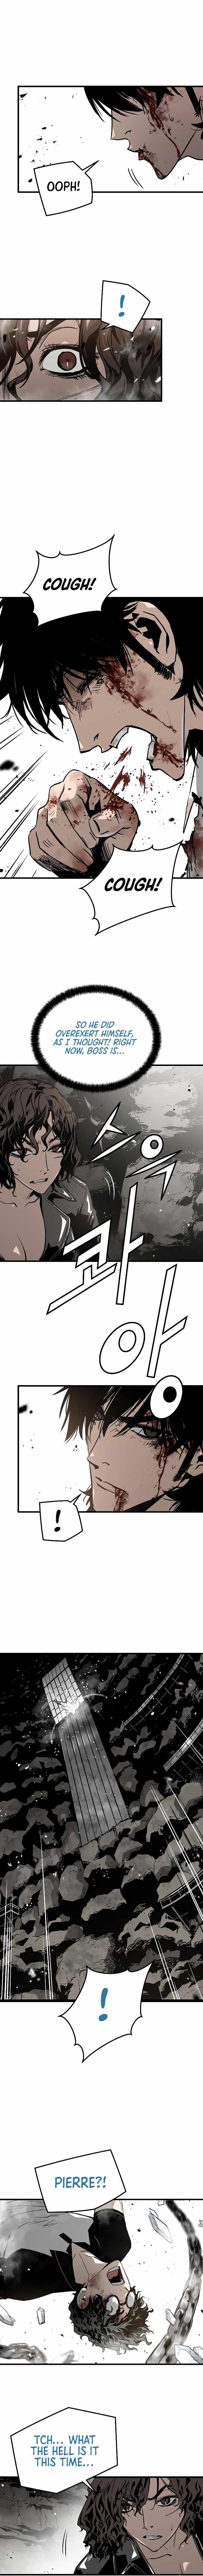 The Breaker 3: Eternal Force chapter 61 page 6